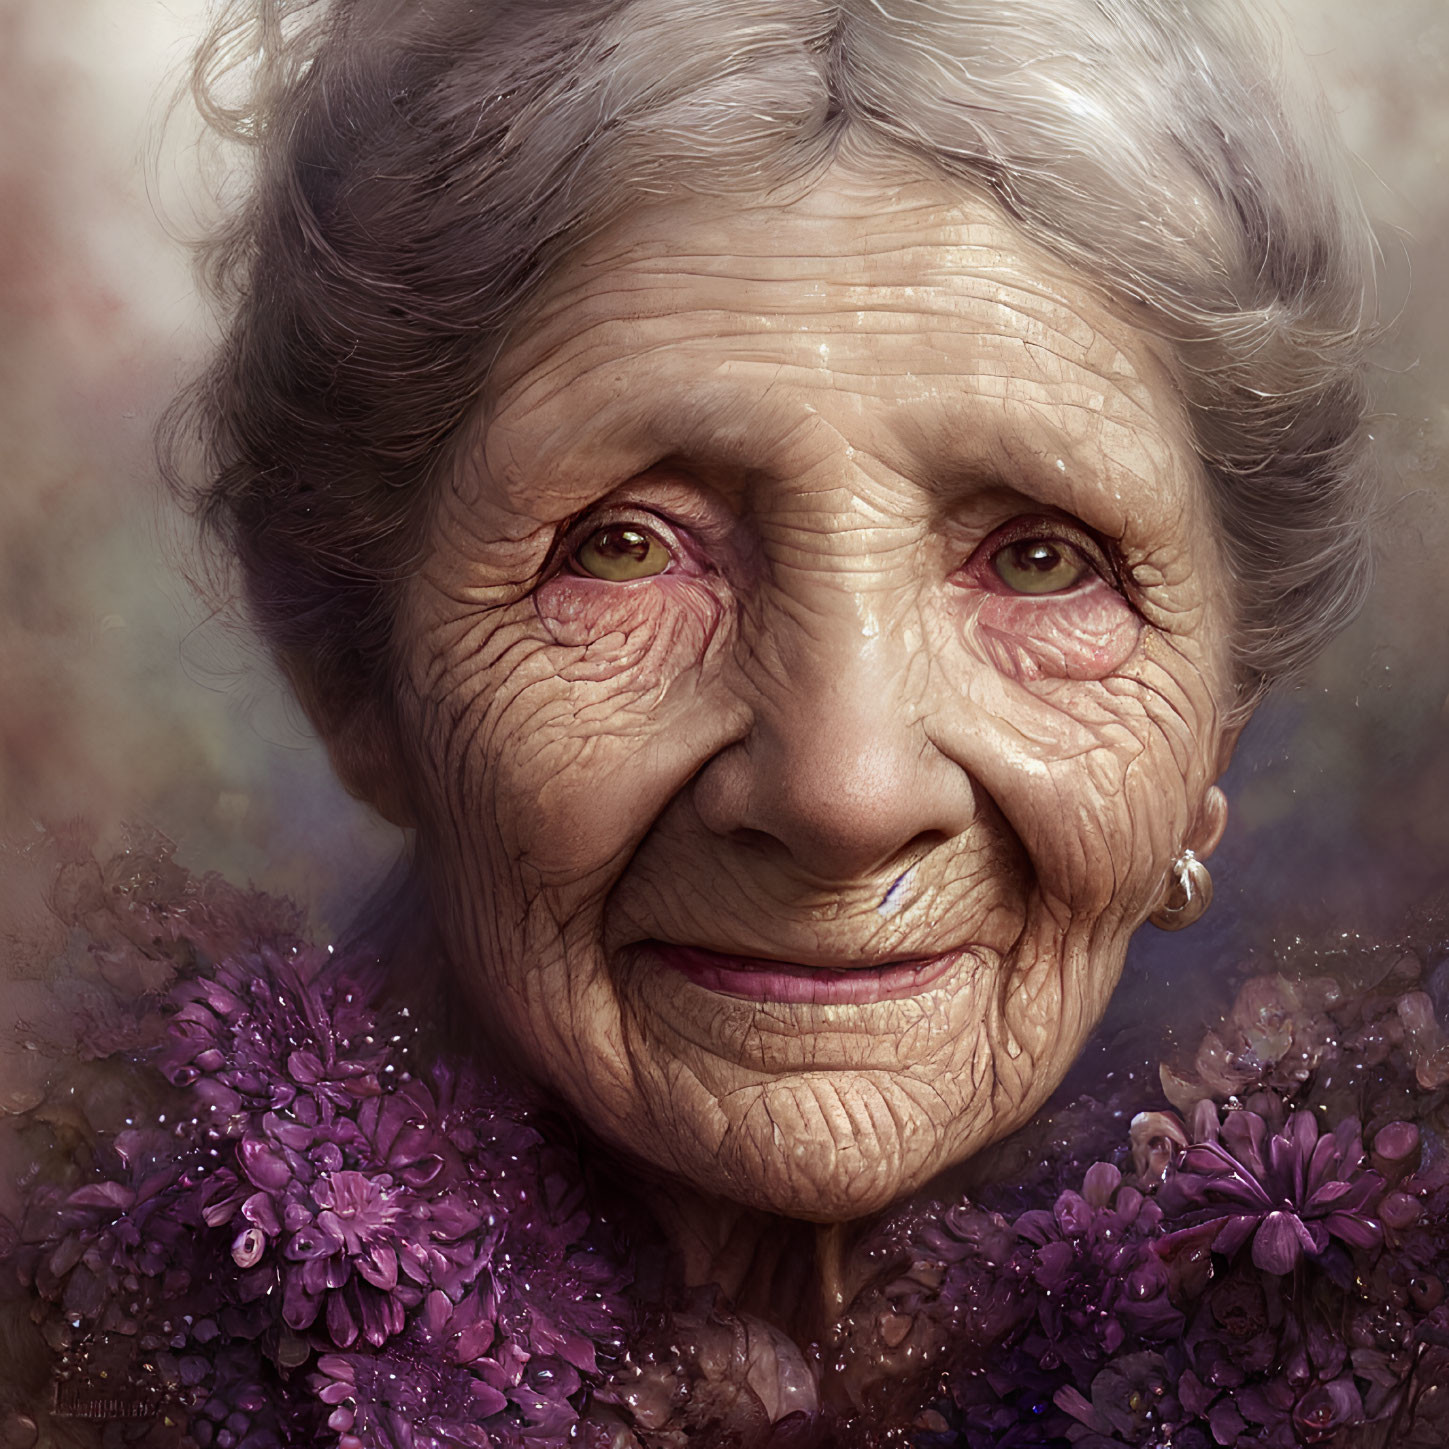 Elderly woman with warm smile, purple flowers, and pearl earring